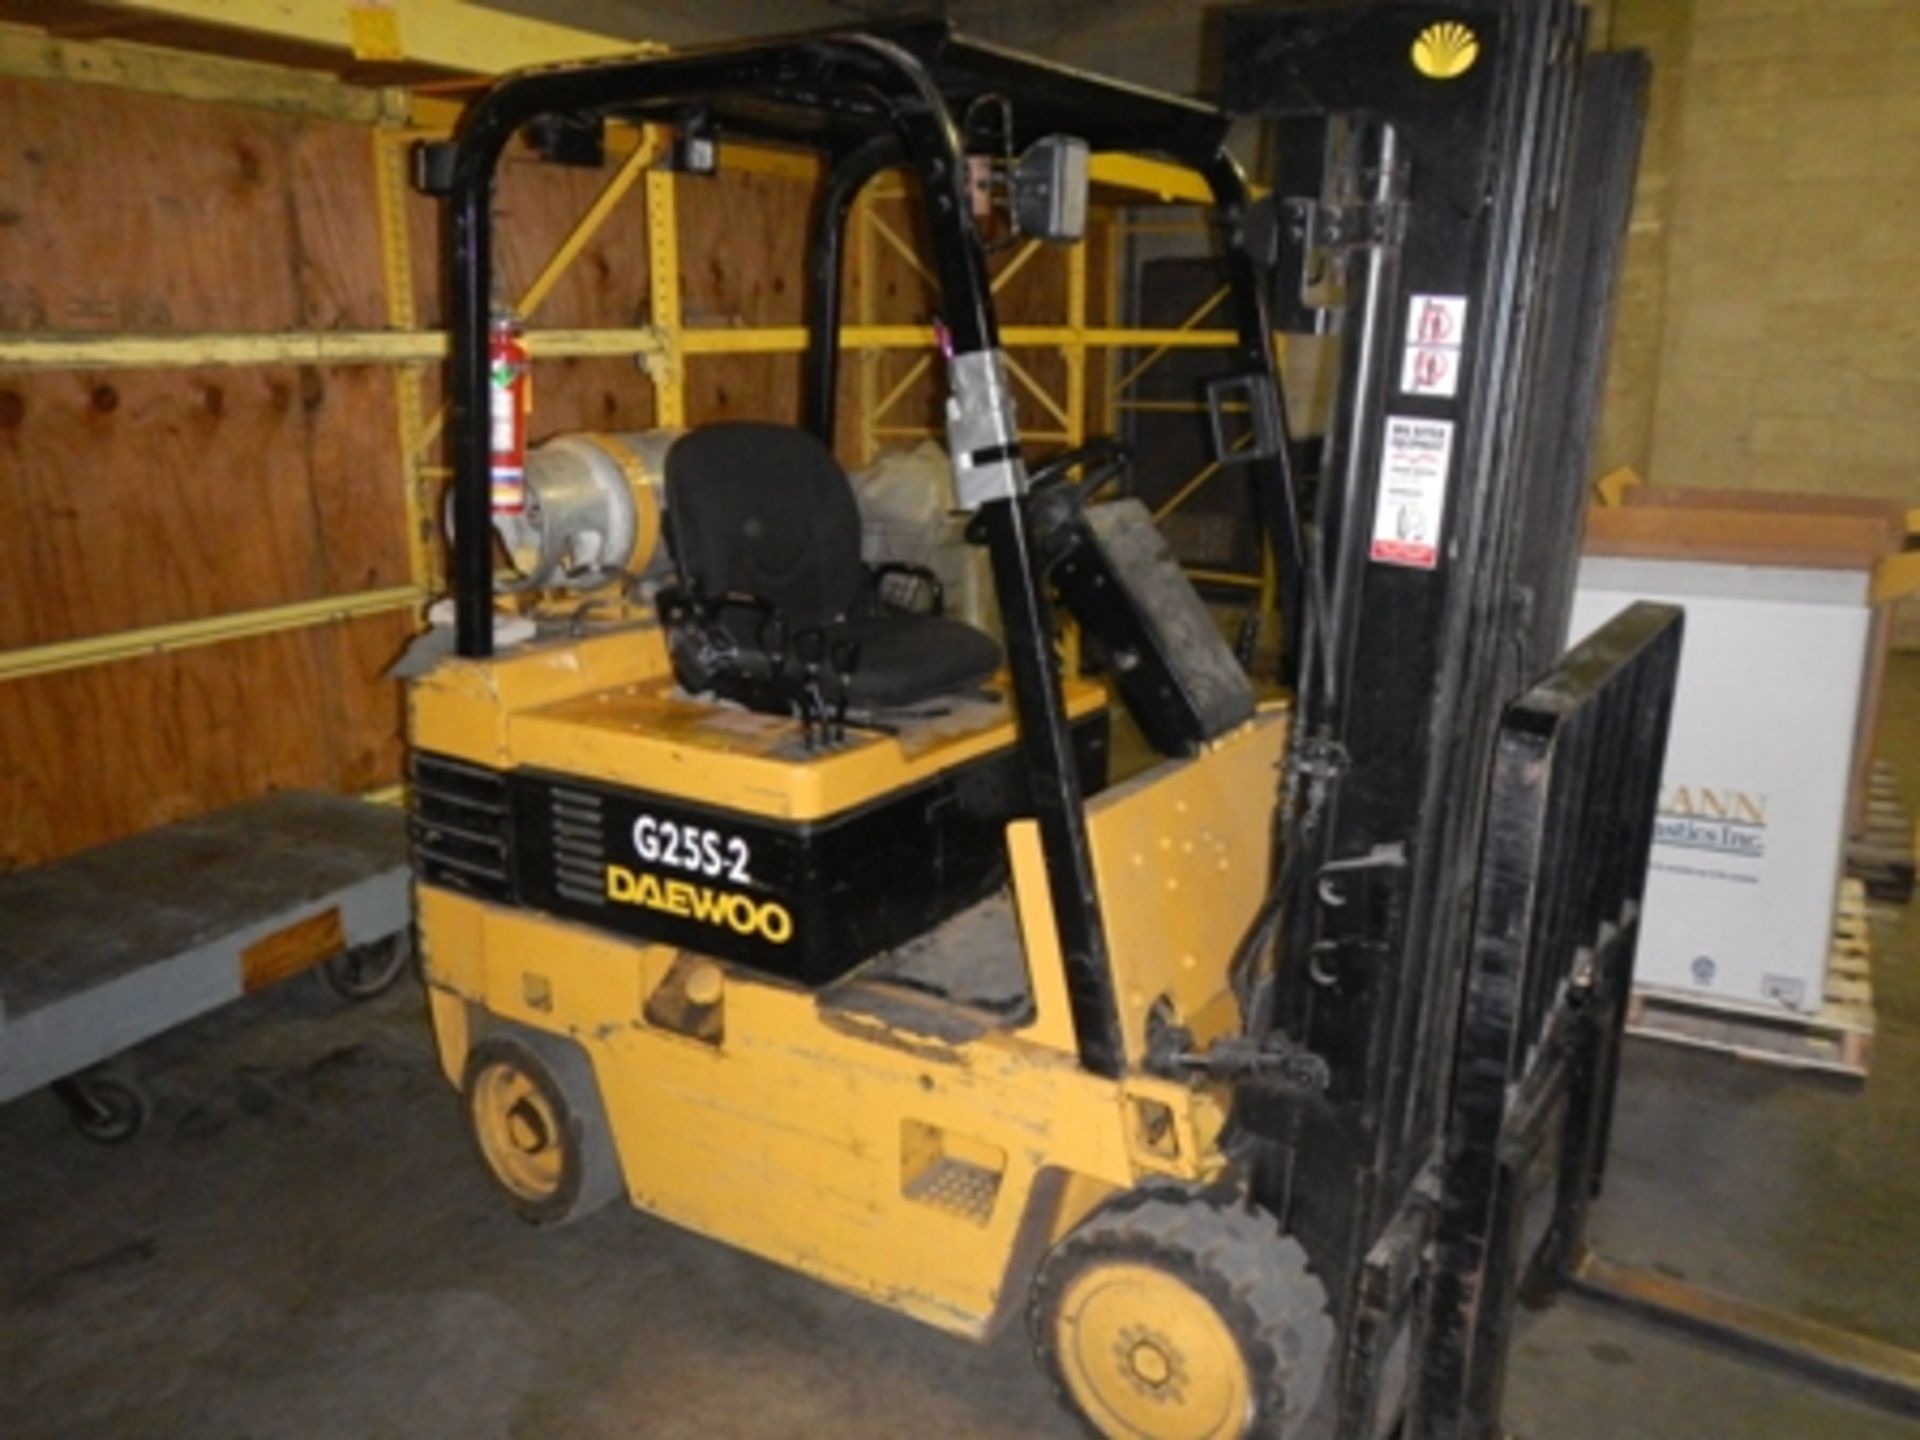 Daewoo G25S-2 5000# LP fork truck, 3 stage, 5735 hours, s/n 06-06296 Â THIS UNIT HAS TO STAY - Image 3 of 4